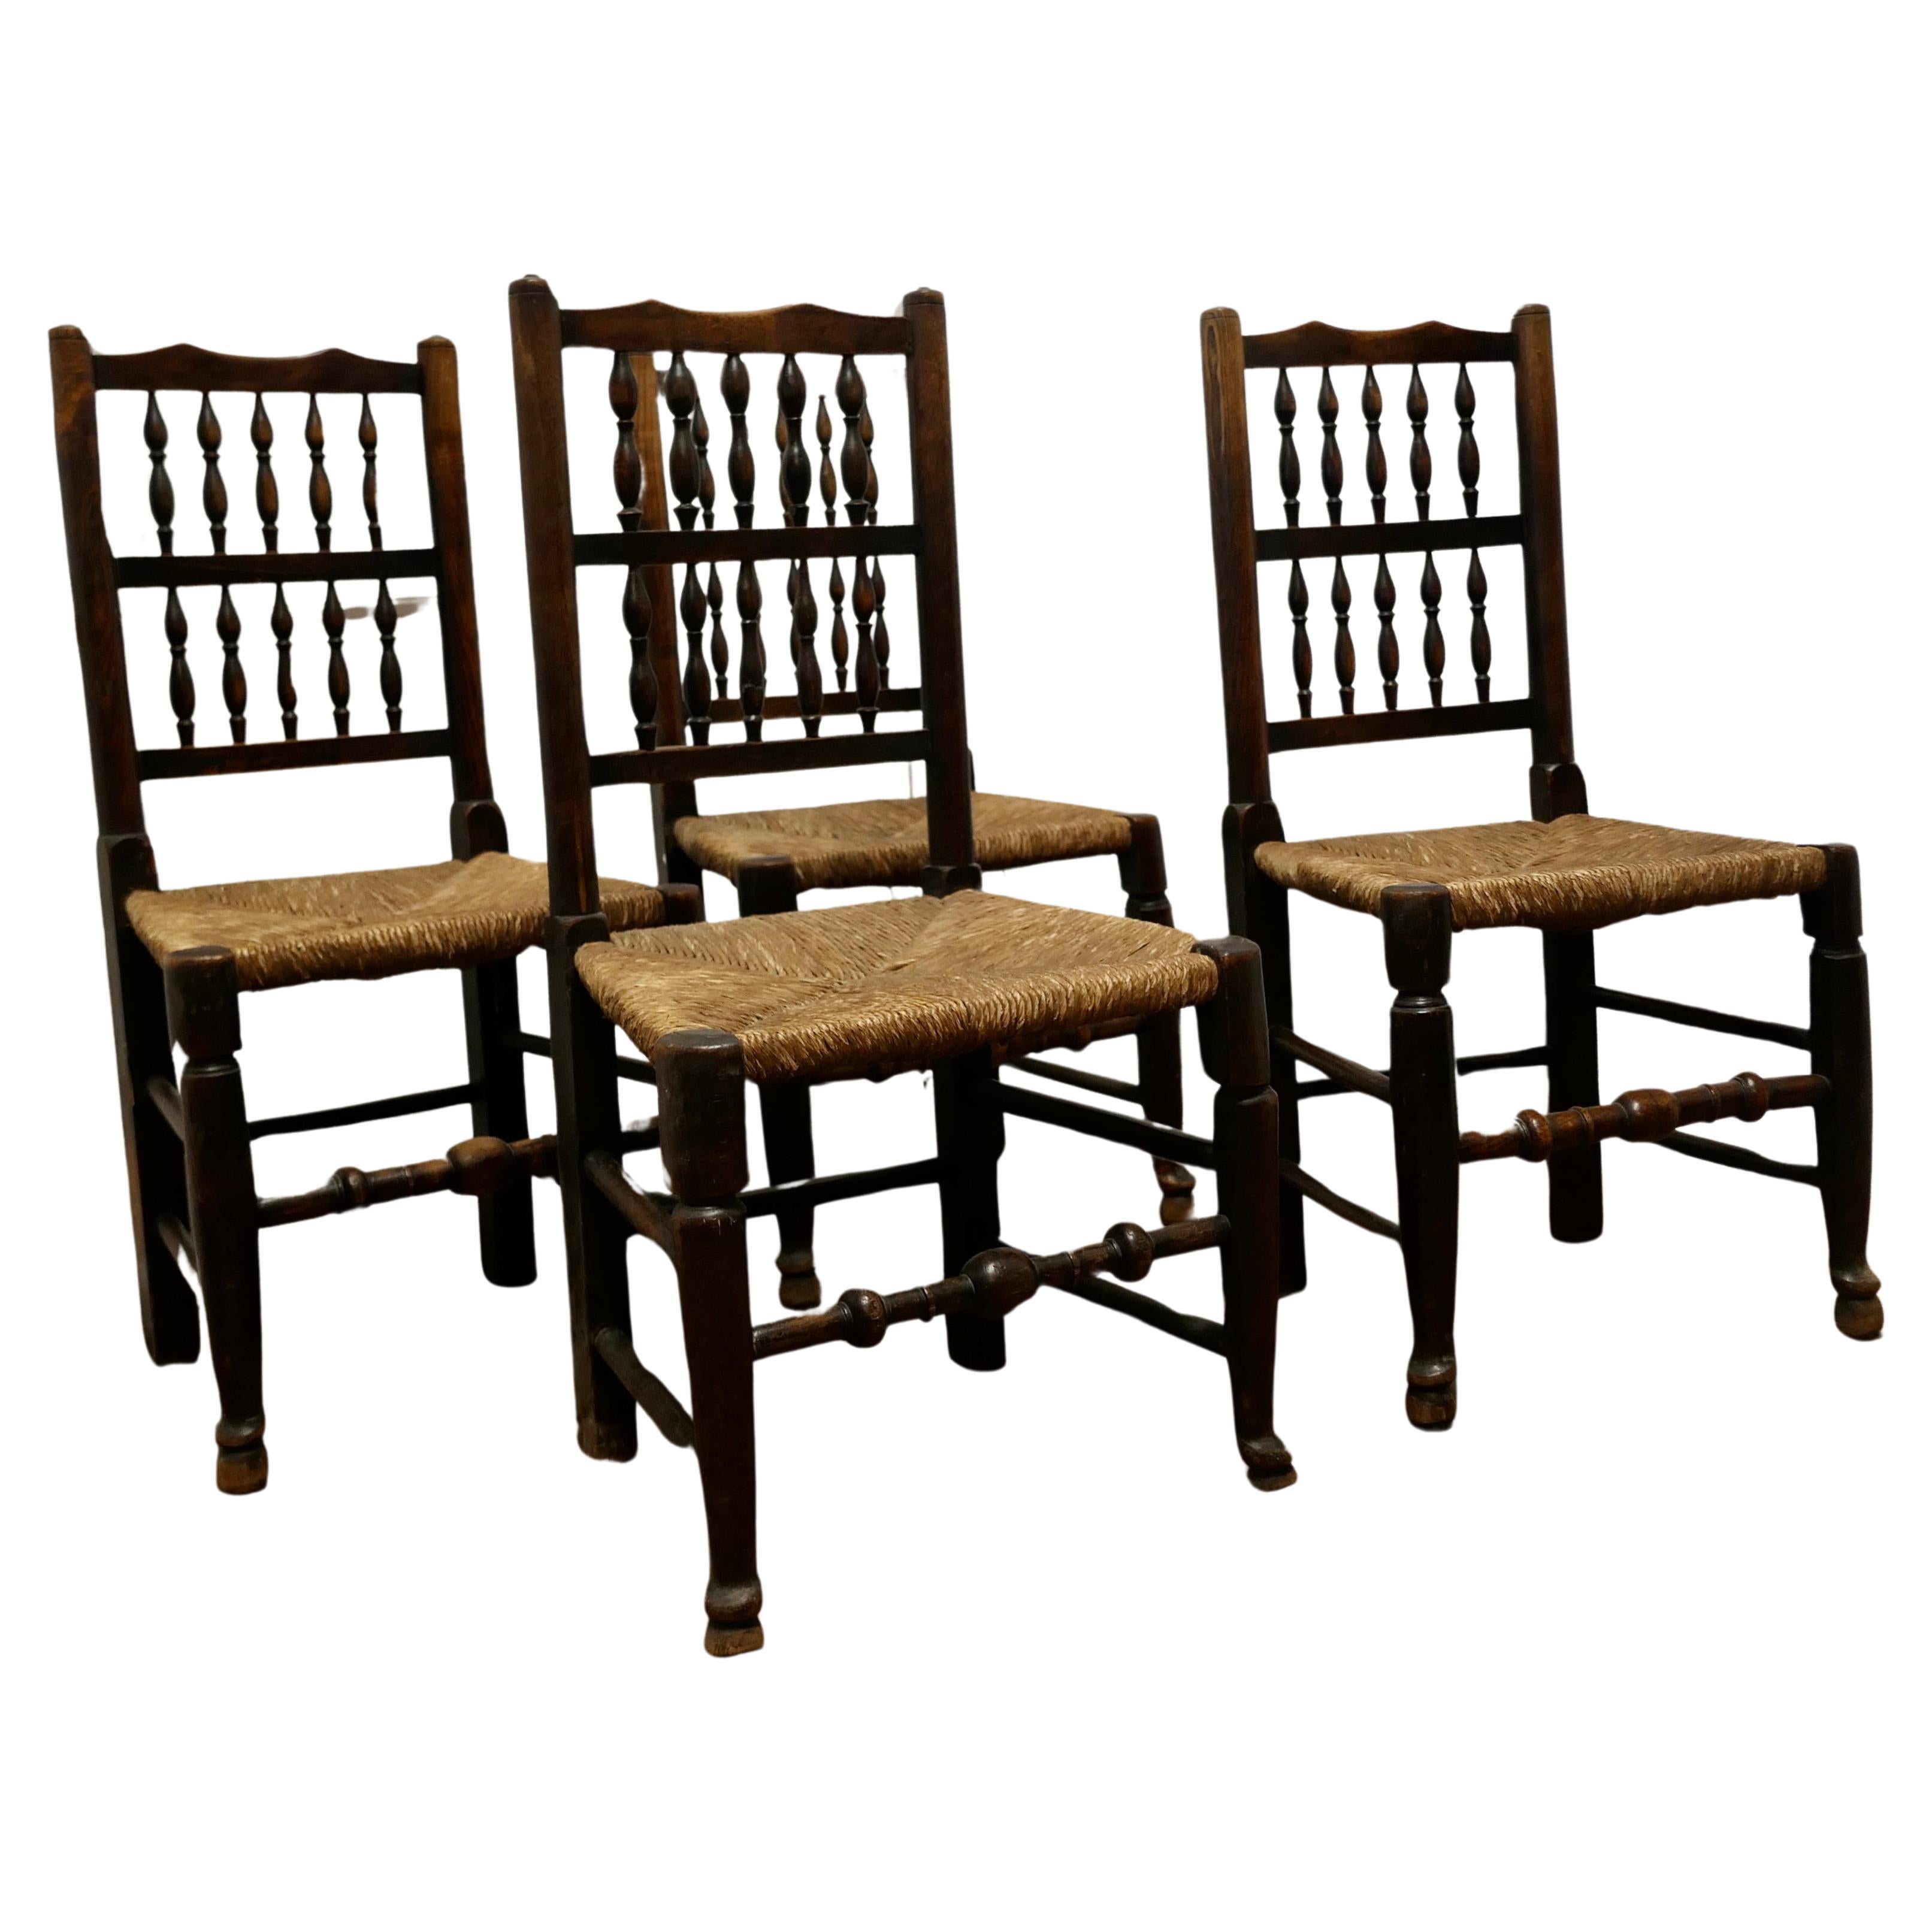 A Set of 4 Lancashire Spindle Back Farmhouse Kitchen Dining Chairs  